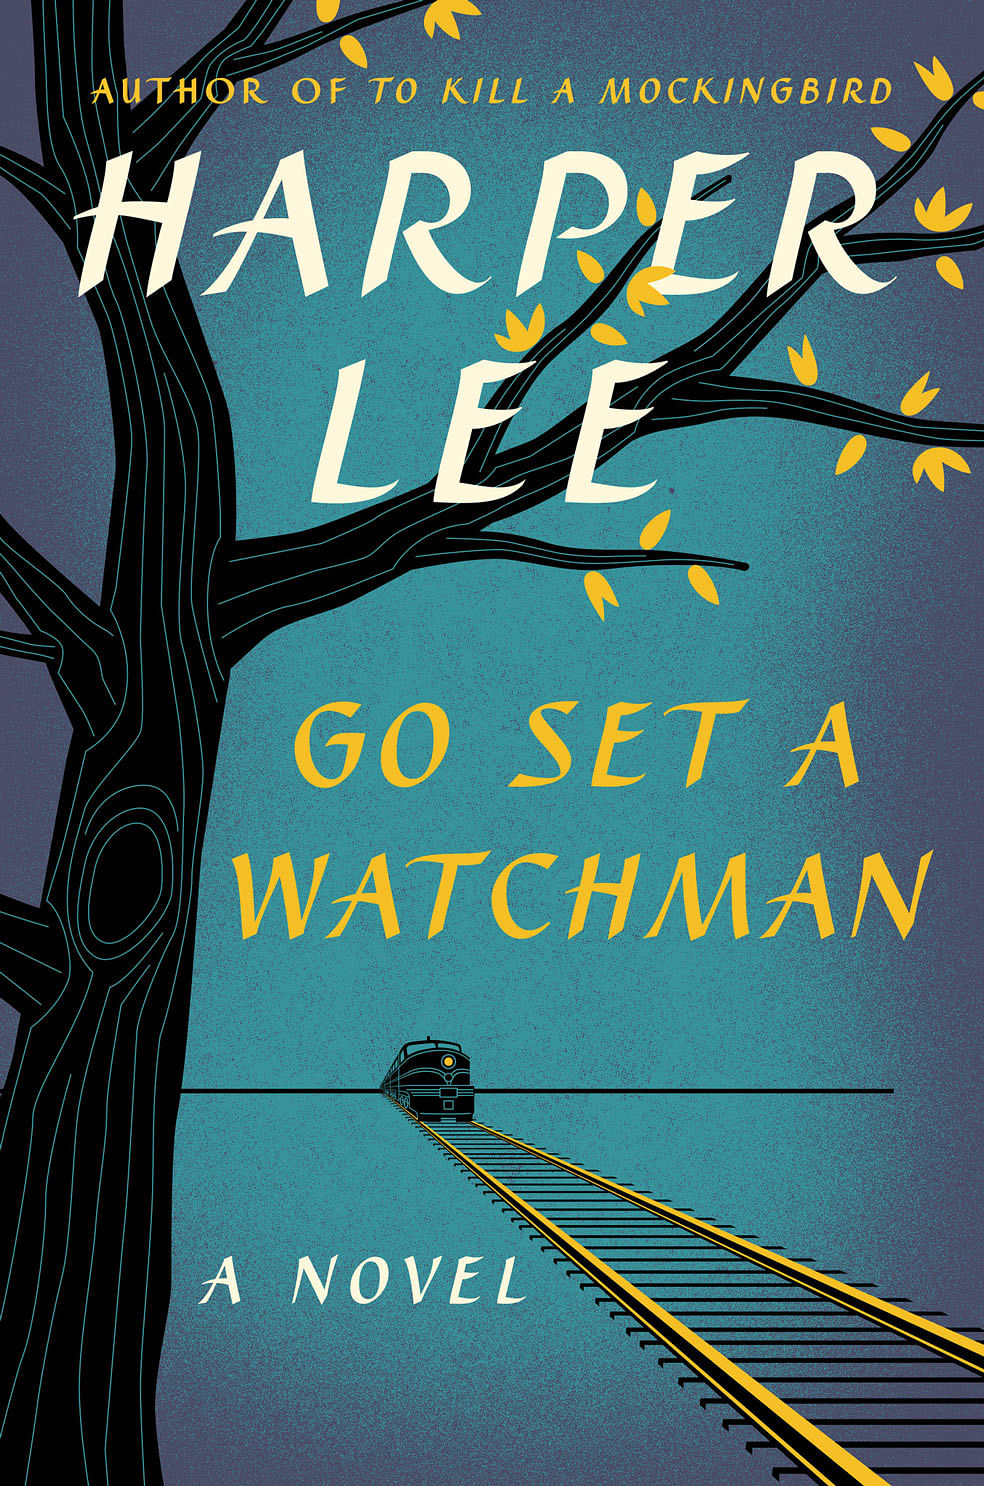 Harper Lee’s last book destroys Atticus Finch, the beloved character from ‘To Kill a Mocking Bird’.